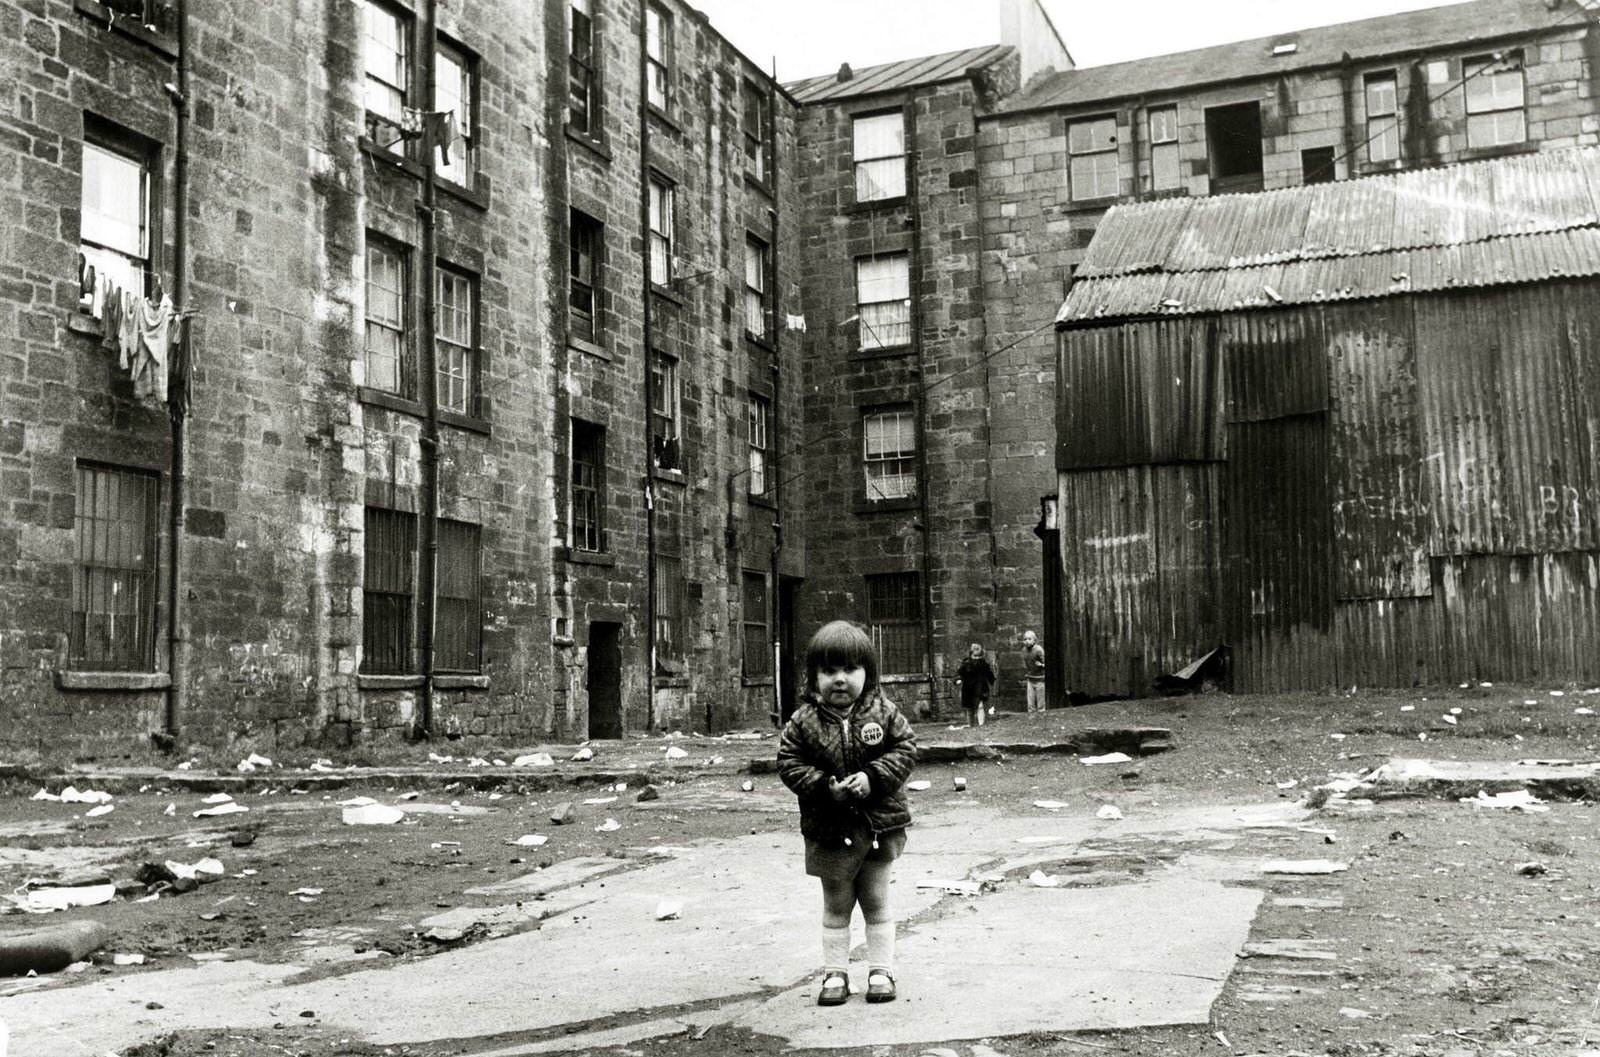 A scene in the Gorbals area of Glasgow, Scotland, showing the slums, some of the worst in Britain, 1974